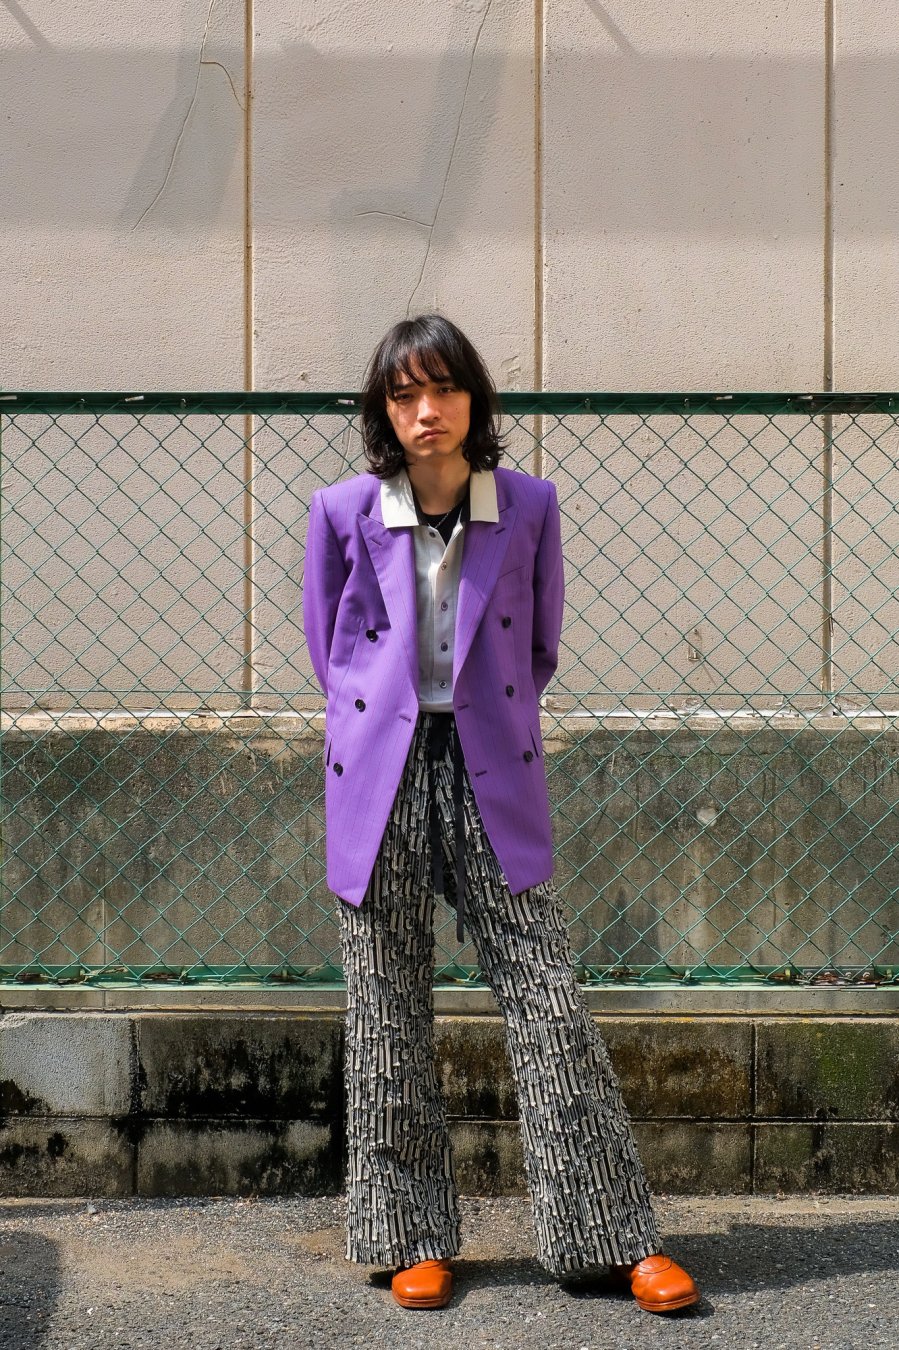 LITTLEBIG（リトルビッグ）の22ss Concaved Shoulder Jacket Purple 